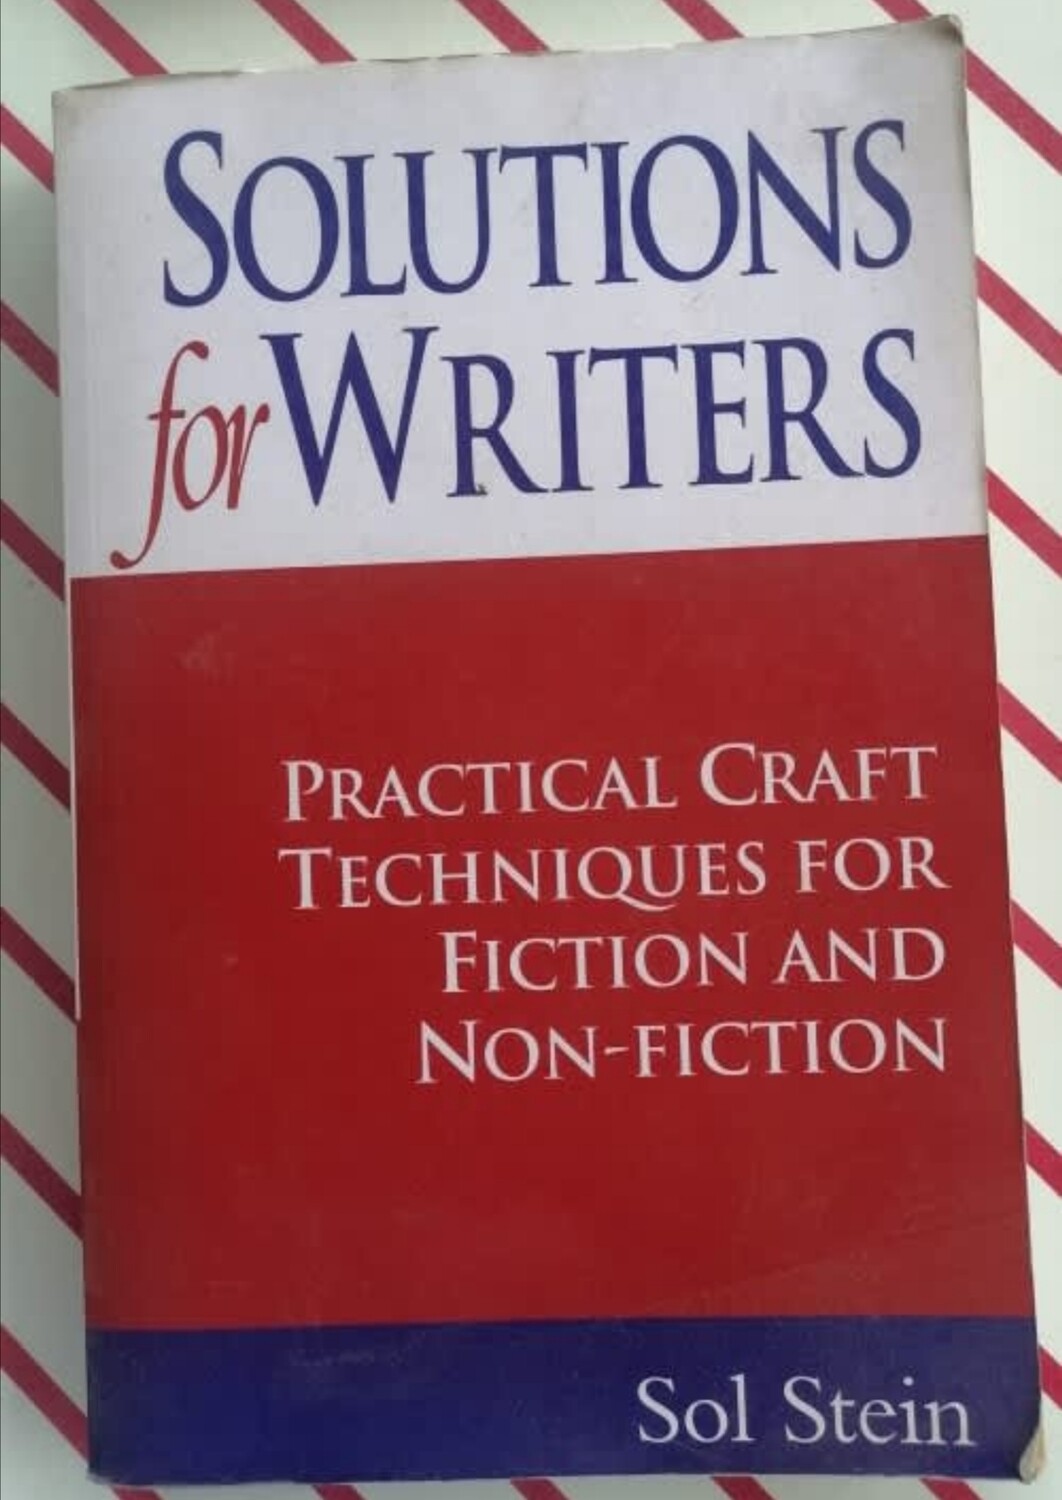 Solutions for writers, Sol Stein